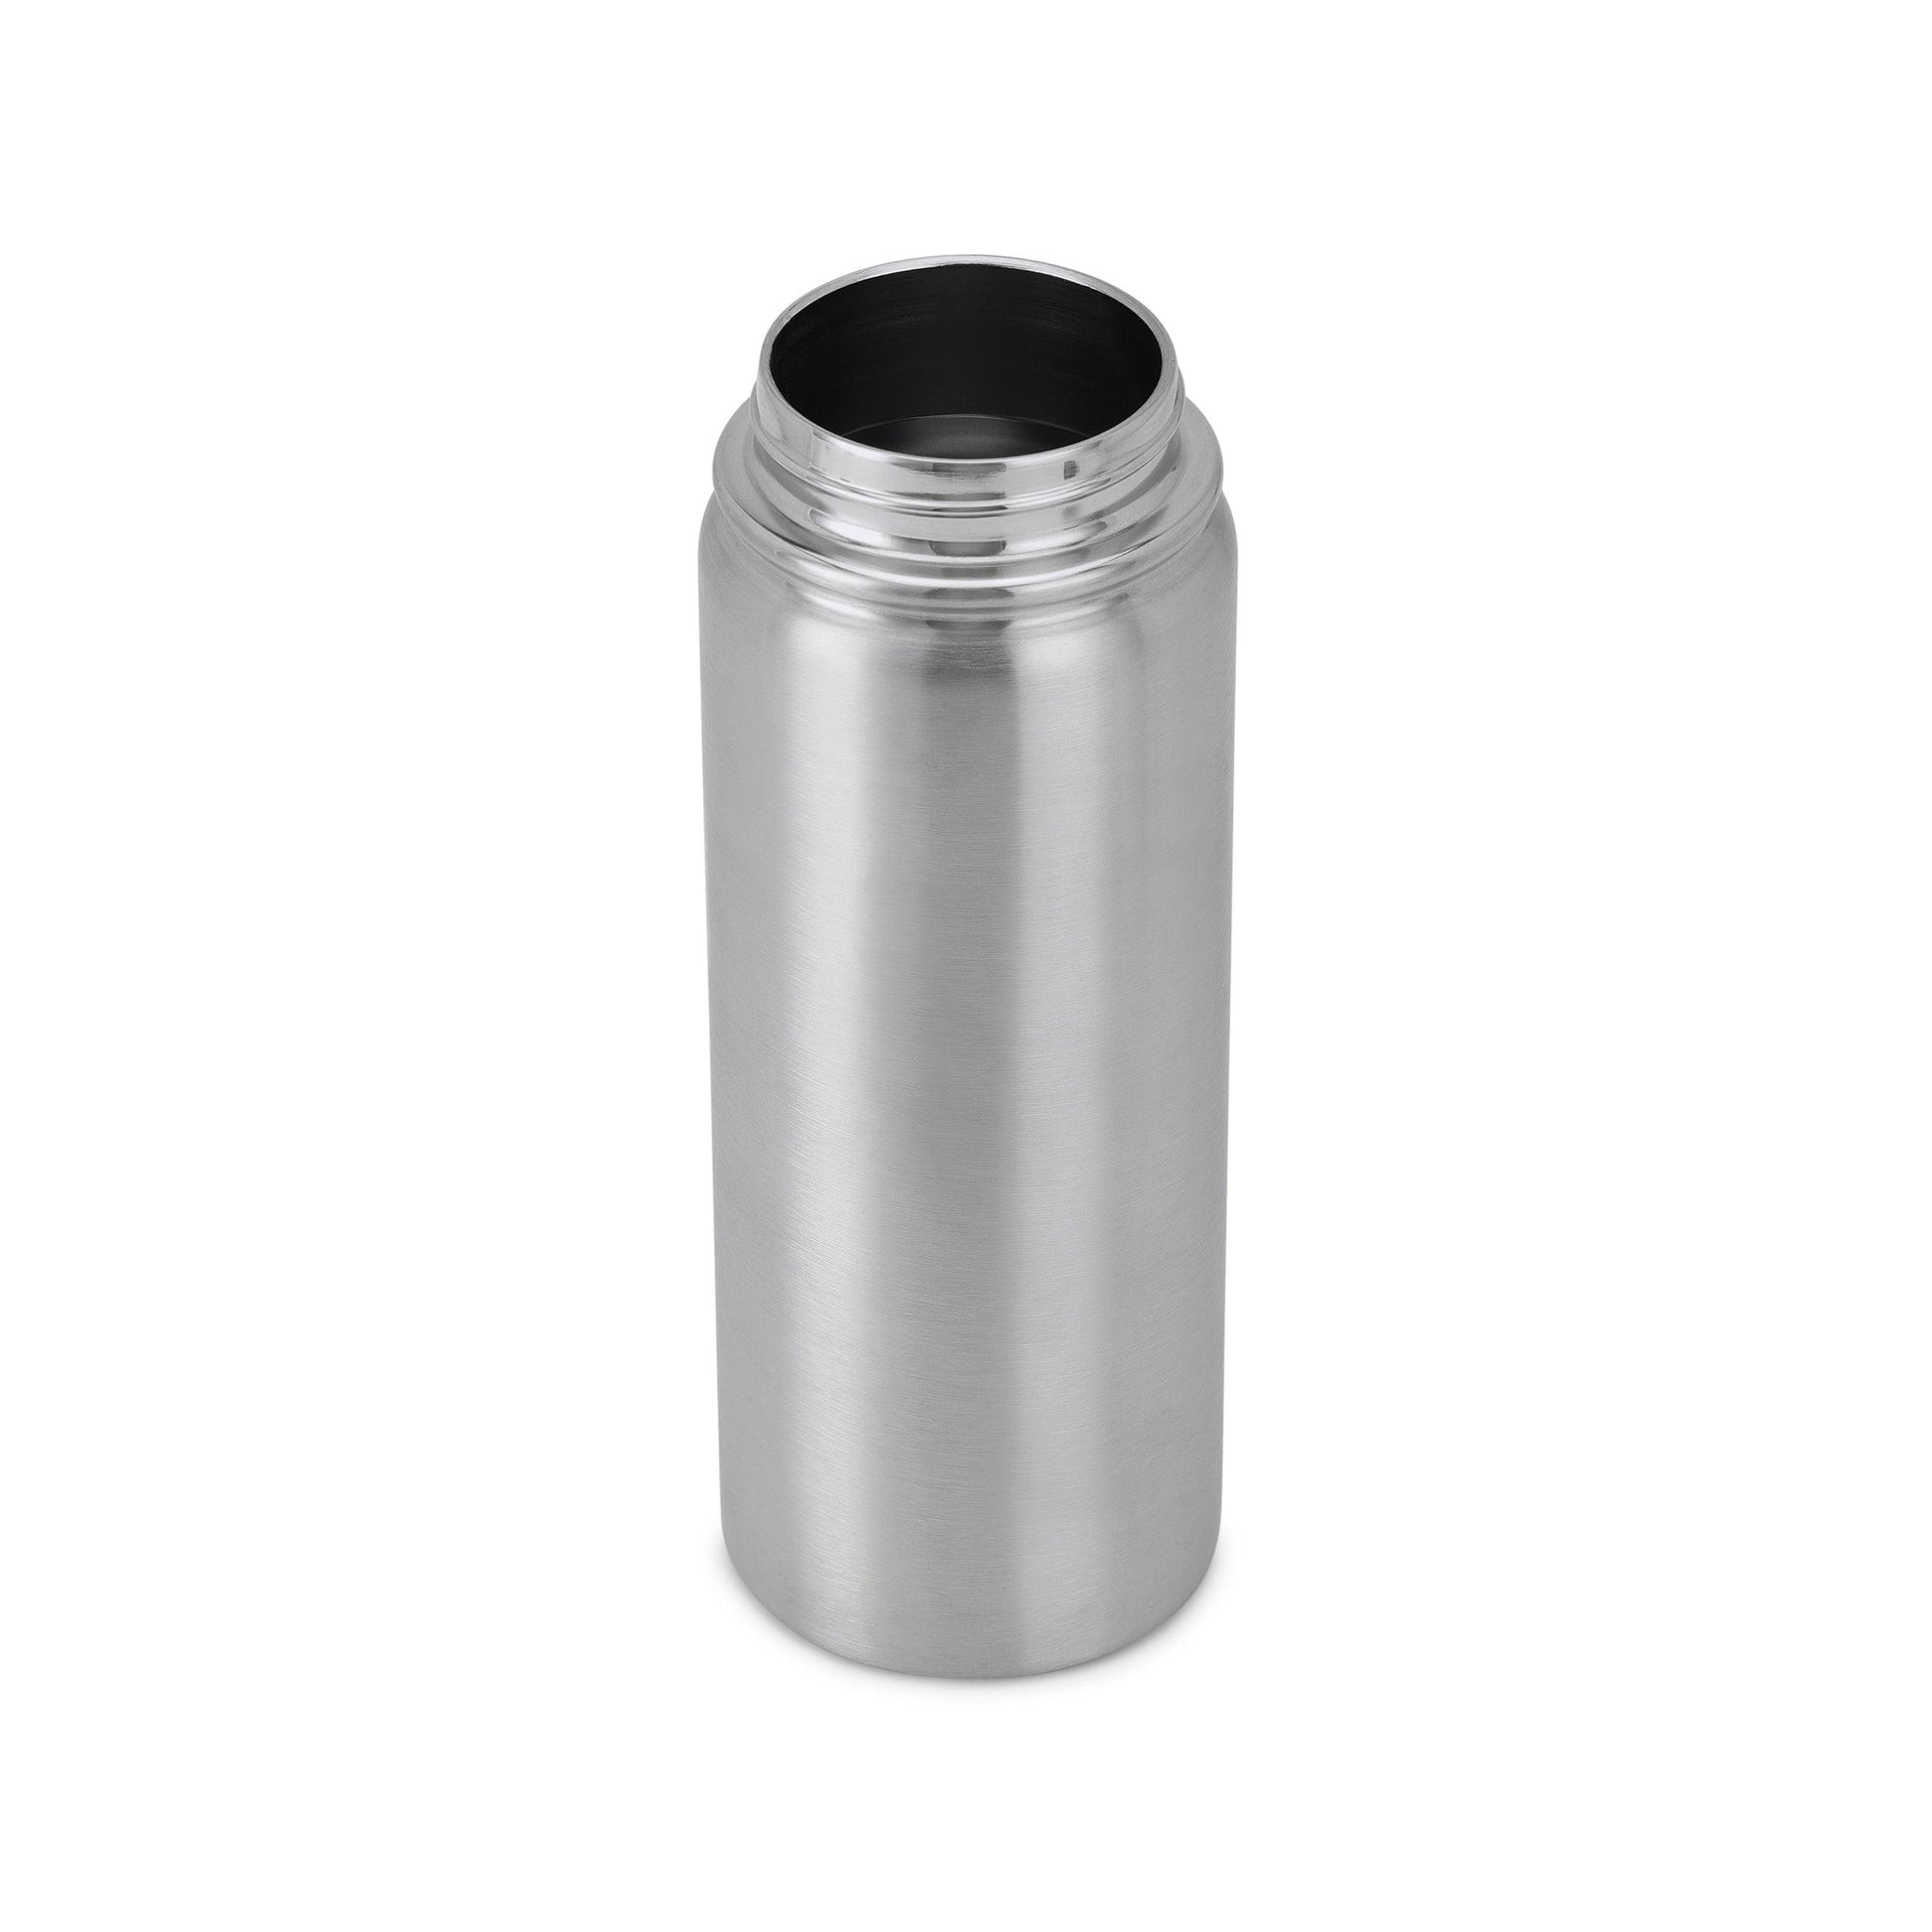 Wholesale Drinkware Wide Mouth Aquaflask Mug 18oz 22 Oz 40oz Thermos Water  Bottle Double Wall Stainless Steel Vacuum Flasks - China Bottle and Cup  price